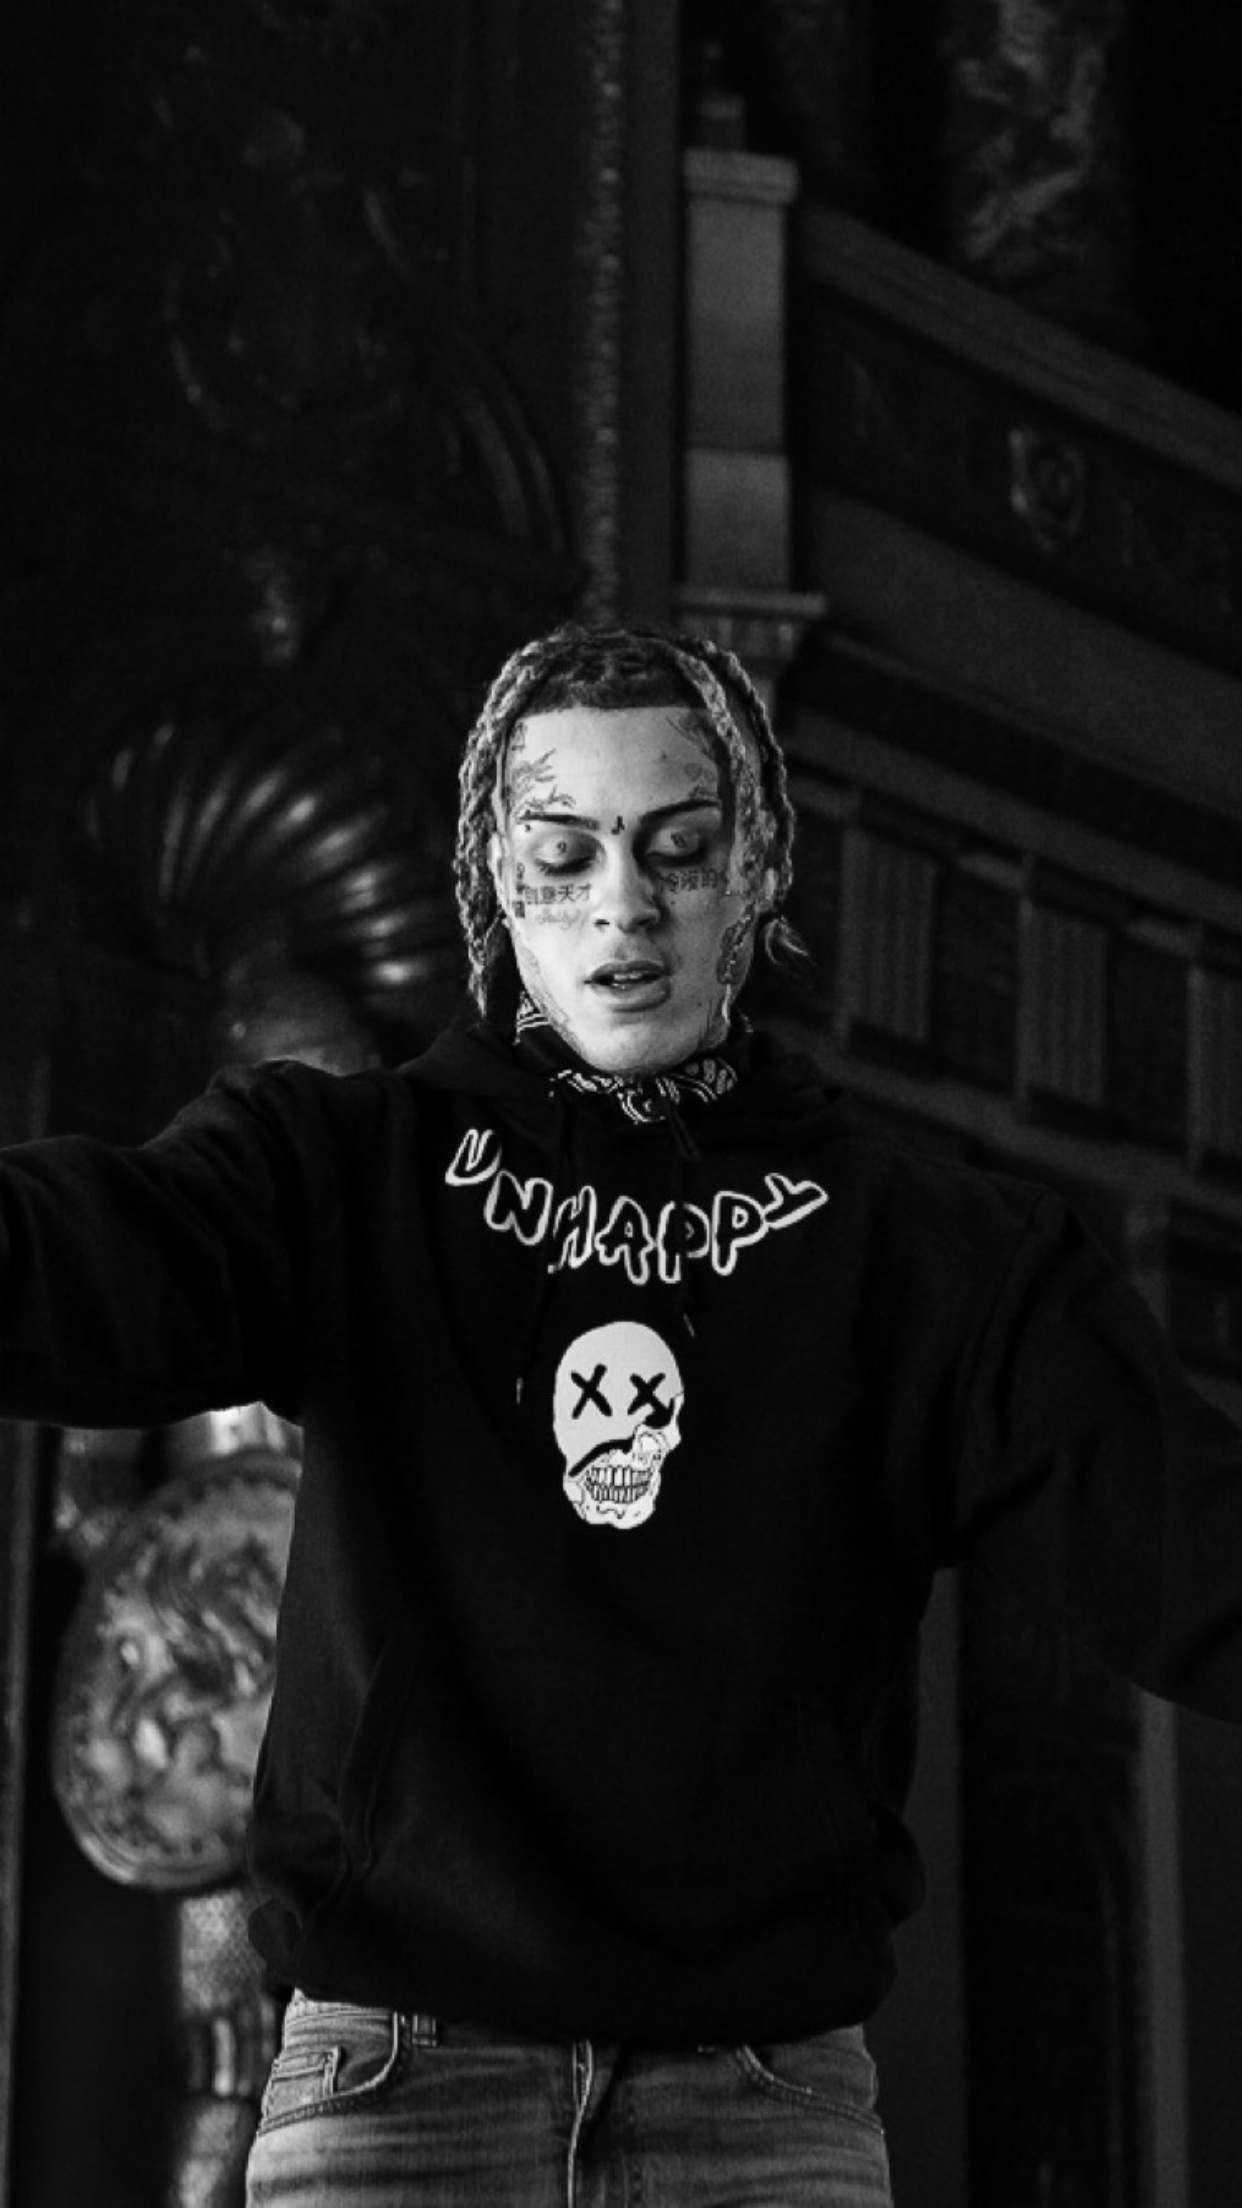 Pin by Maddi on Lil Skies and Landon Cube | Lil skies, Gangsta rap, Old school aesthetic 1250x2210